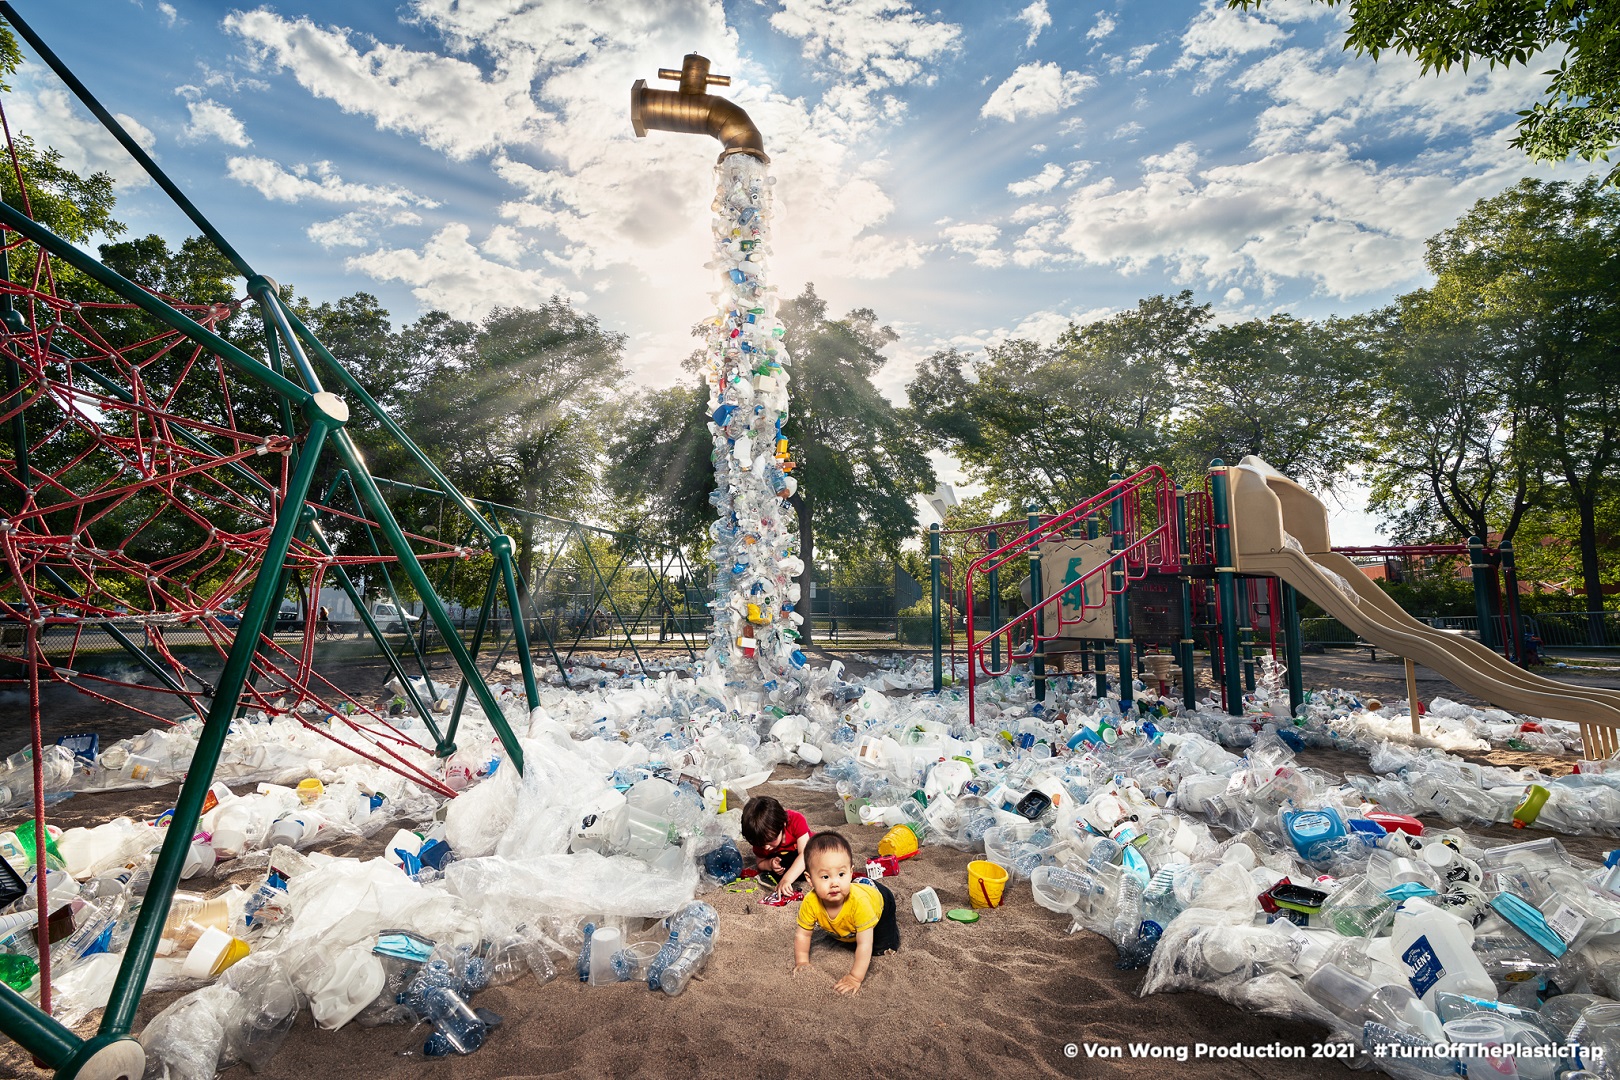 A photo by Benjamin Von Wong for his ‘Turn off The Plastic Tap’ project calling on corporations to stop producing single-use plastic.